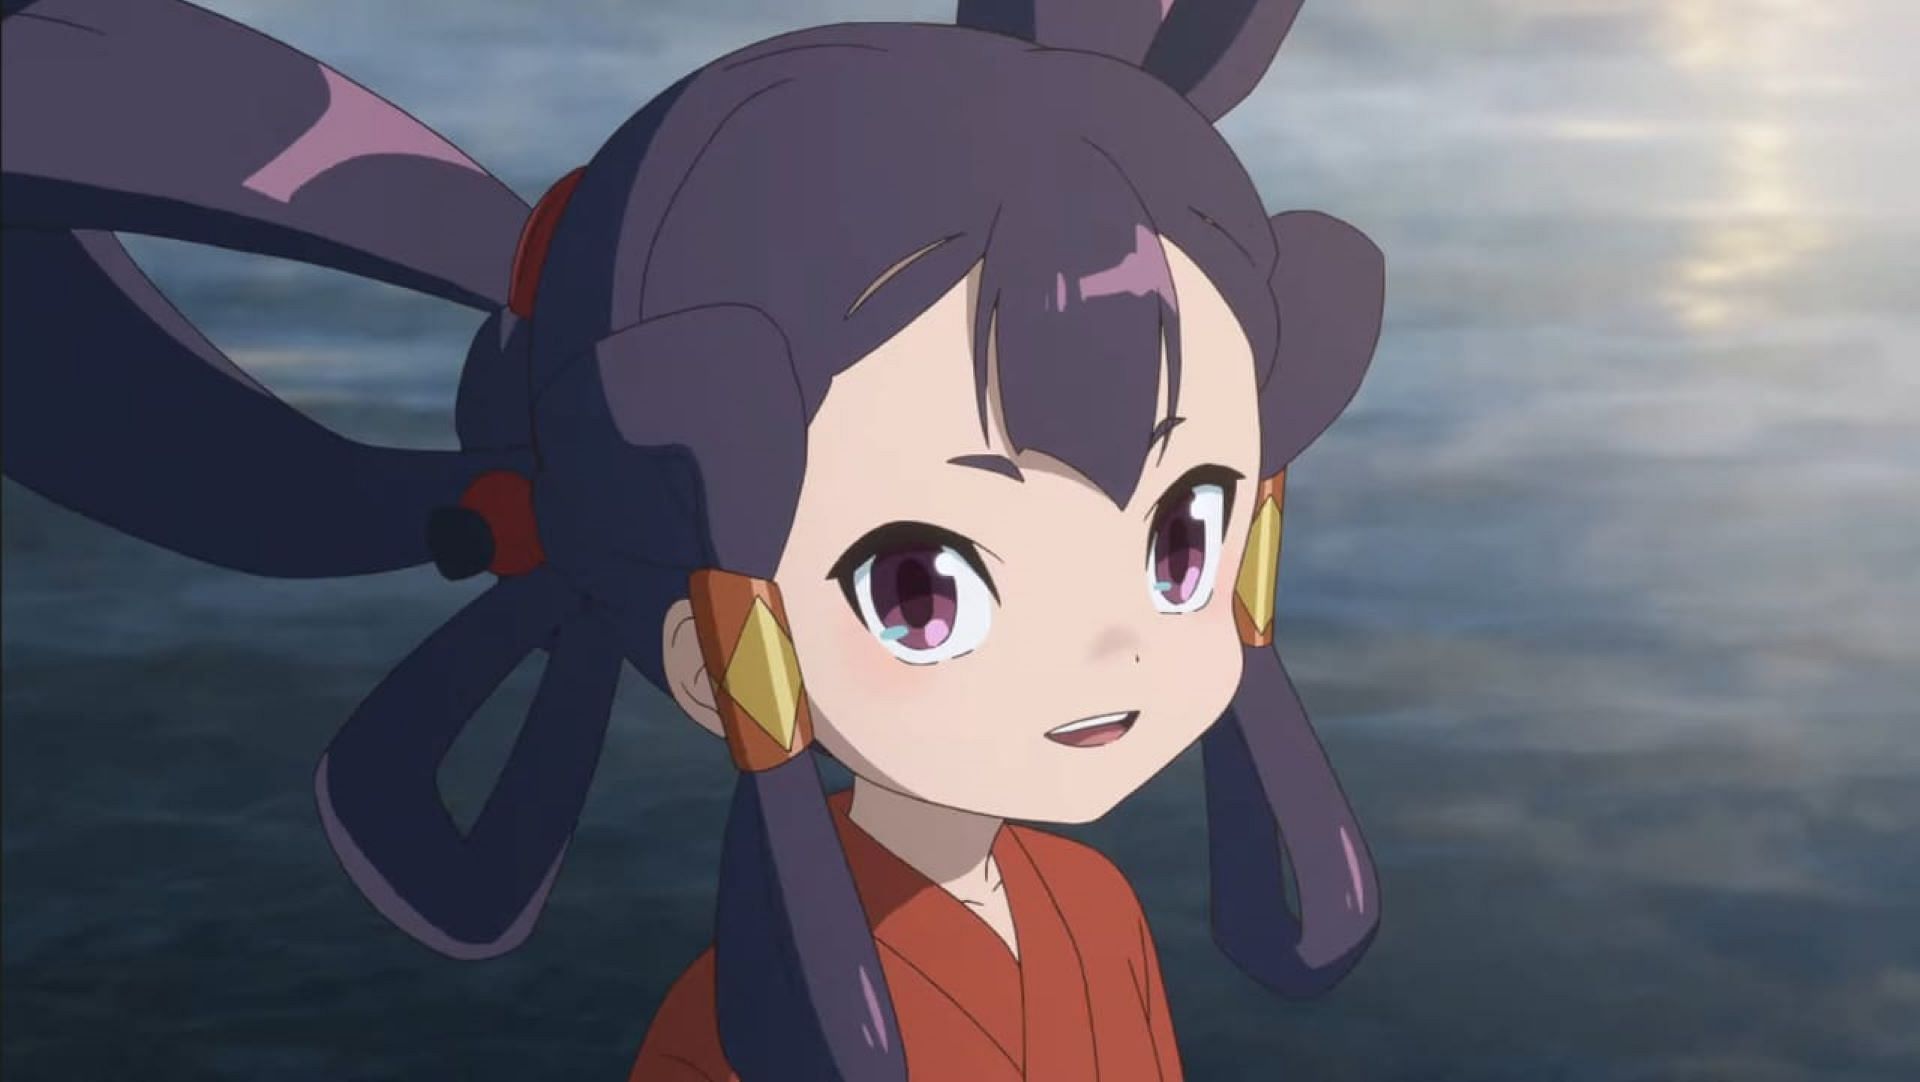 Sakuna Hime, as seen in the anime (Image via P.A.Works)